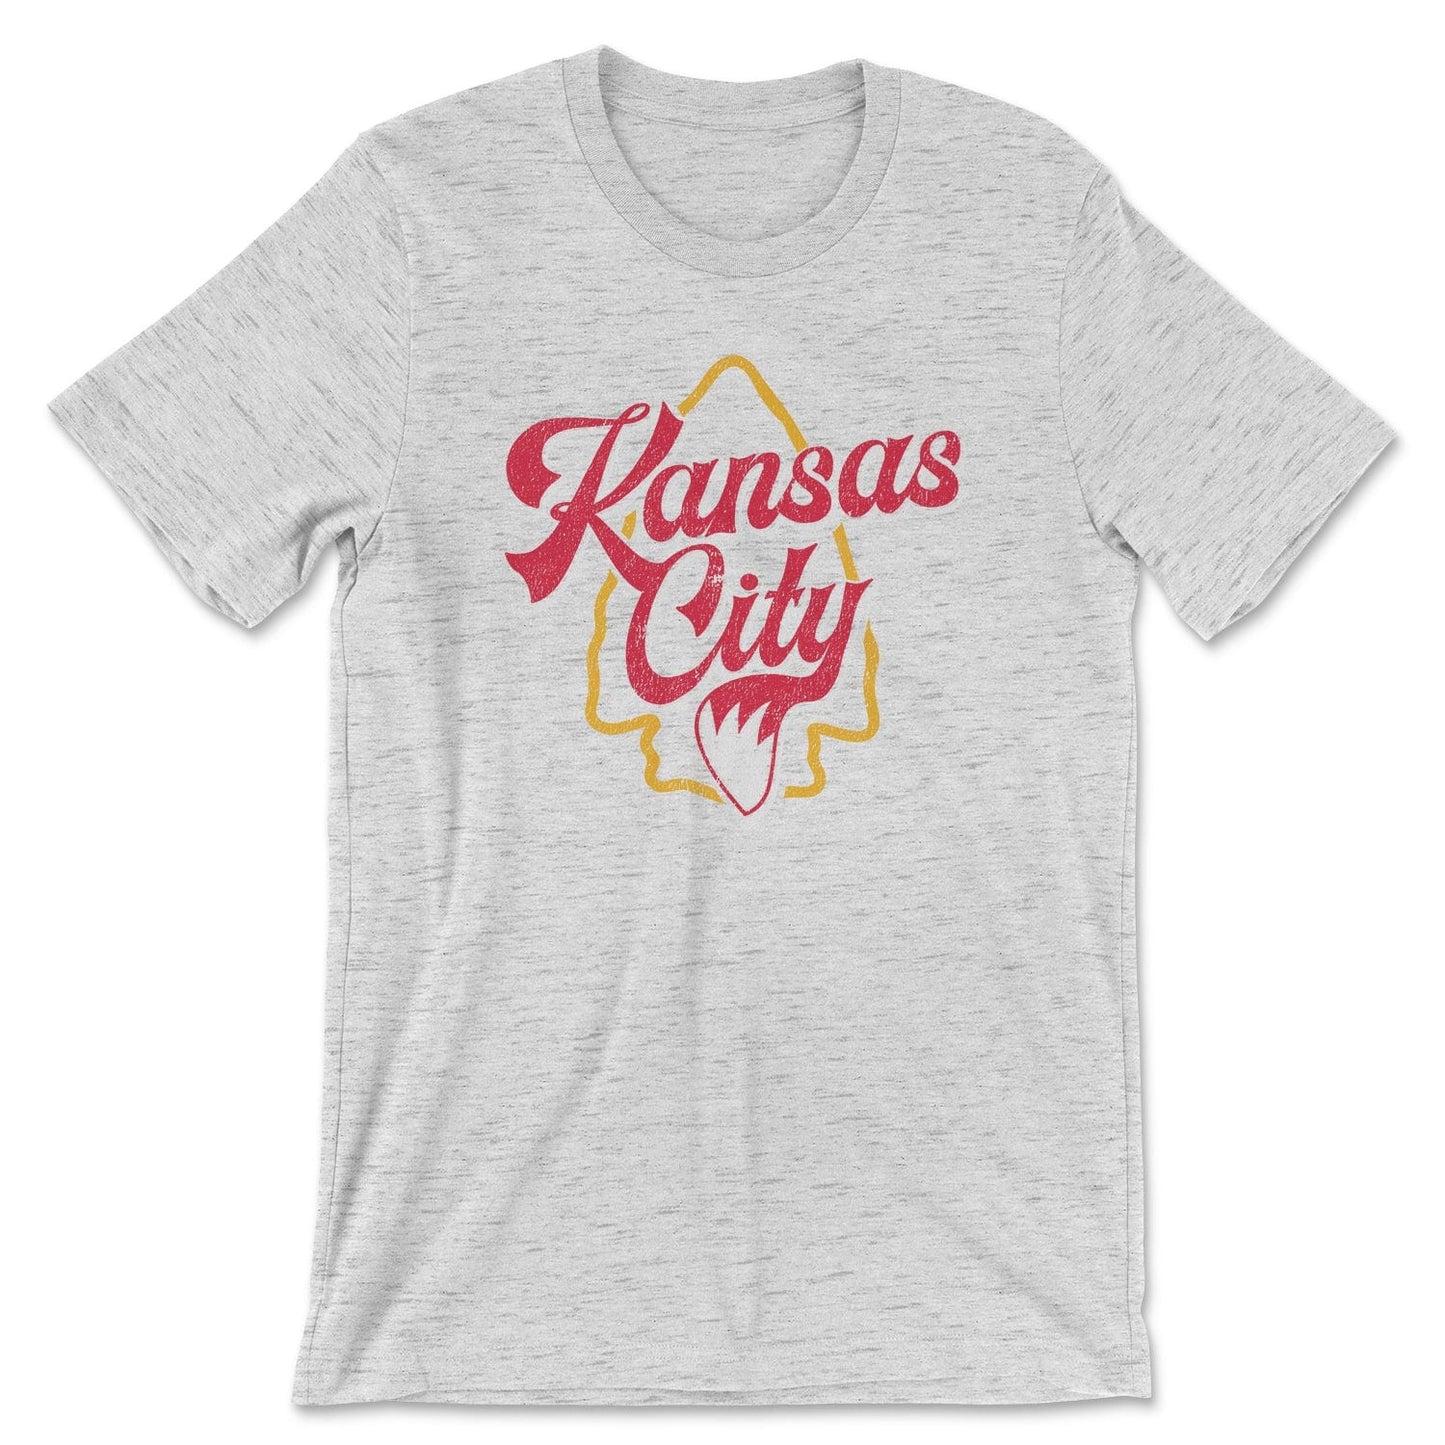 KC Swag Kansas City Chiefs red/yellow KANSAS CITY (with foxtail) with arrowhead graphic on ash grey t-shirt